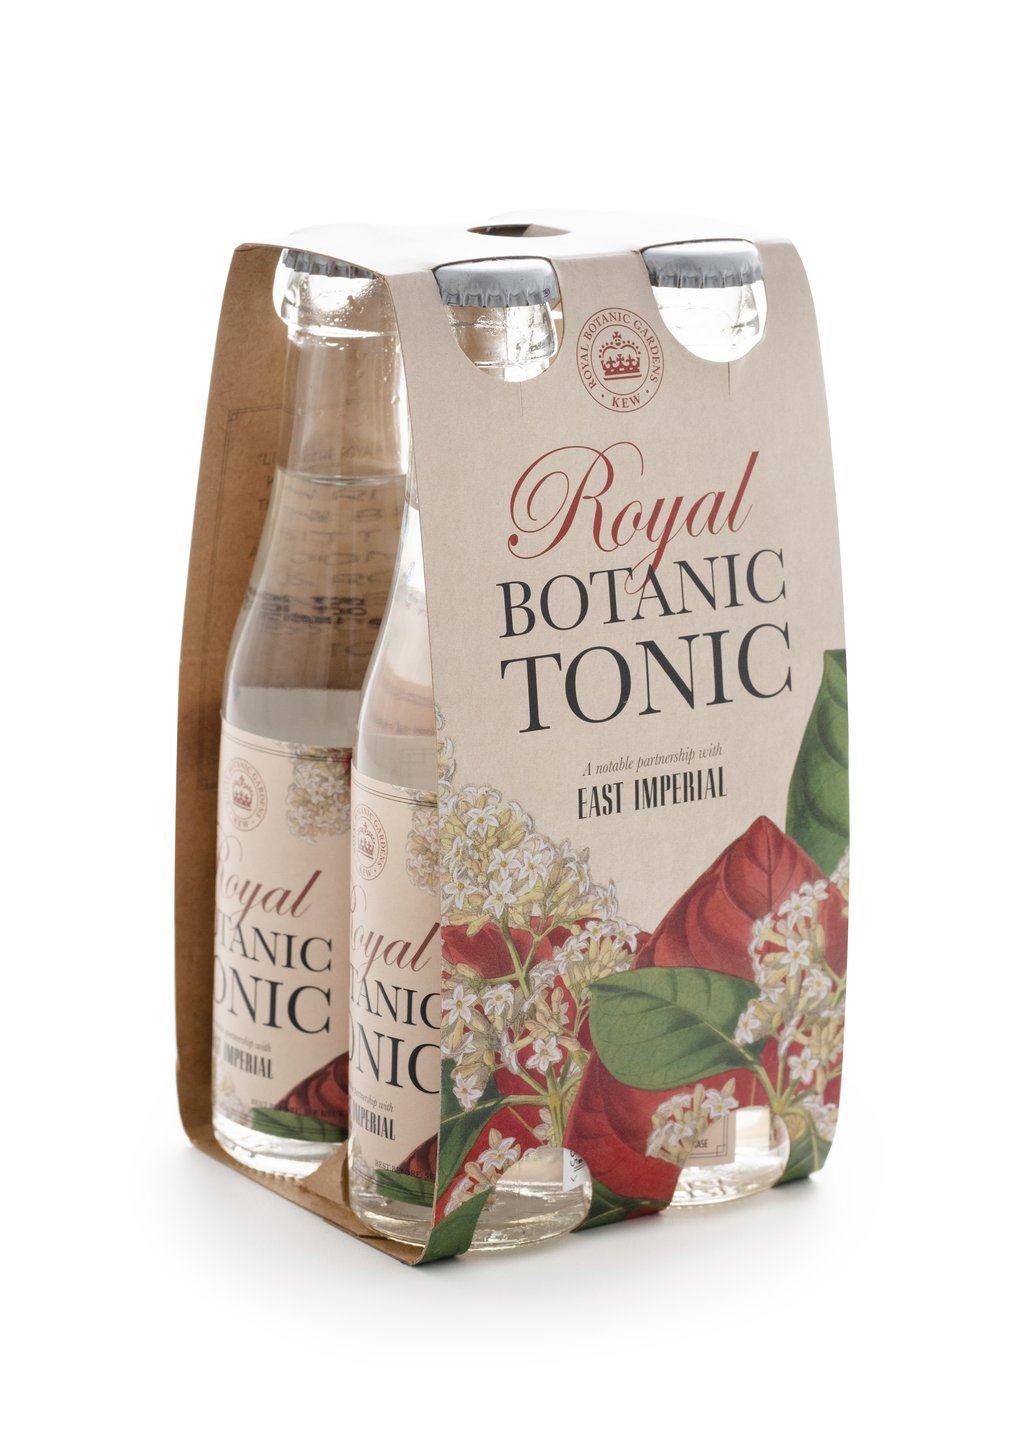 East Imperial Royal Botanic Tonic (150ml x 4) - Premium Premium Mixer from East Imperial - Shop now at Whiskery